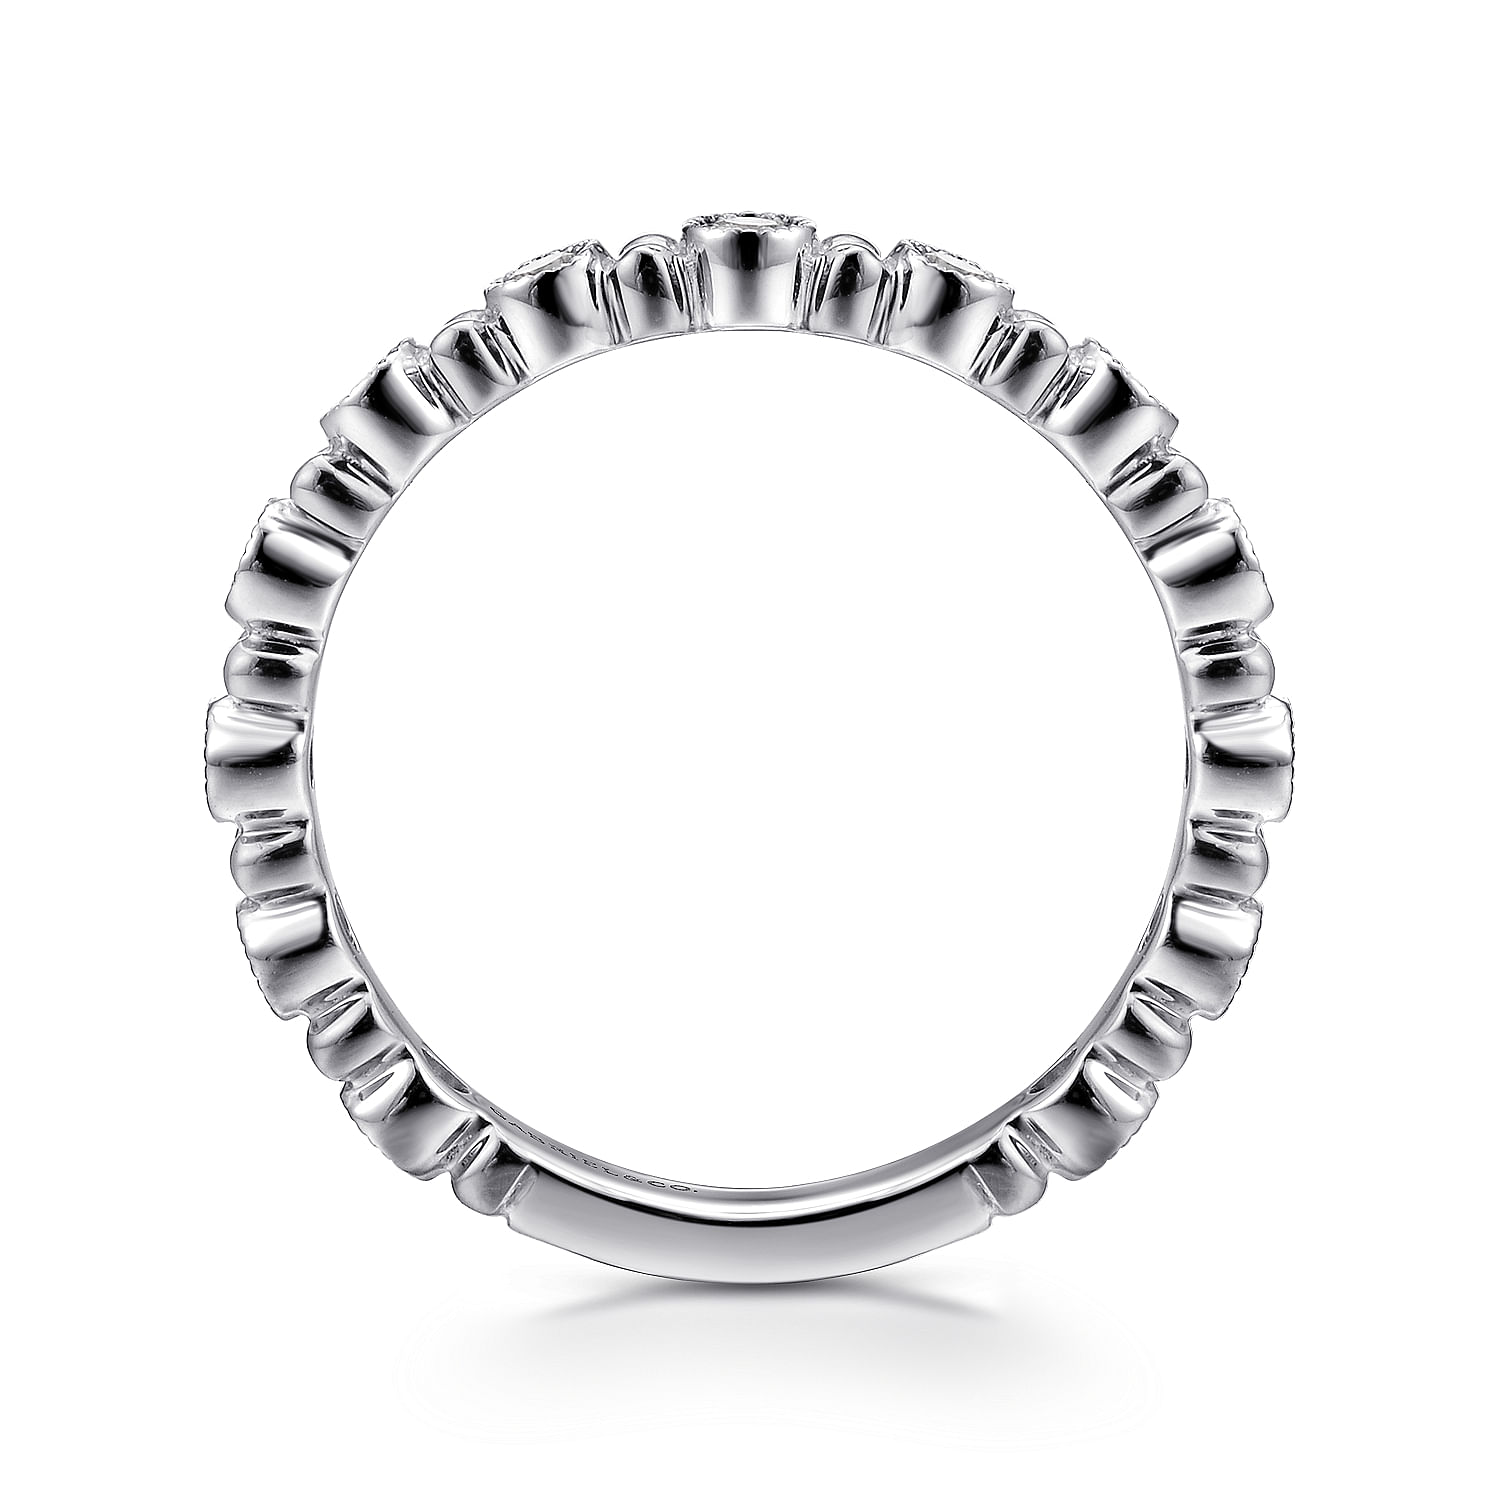 14K White Gold Stackable Diamond Ring with Bead Spacers